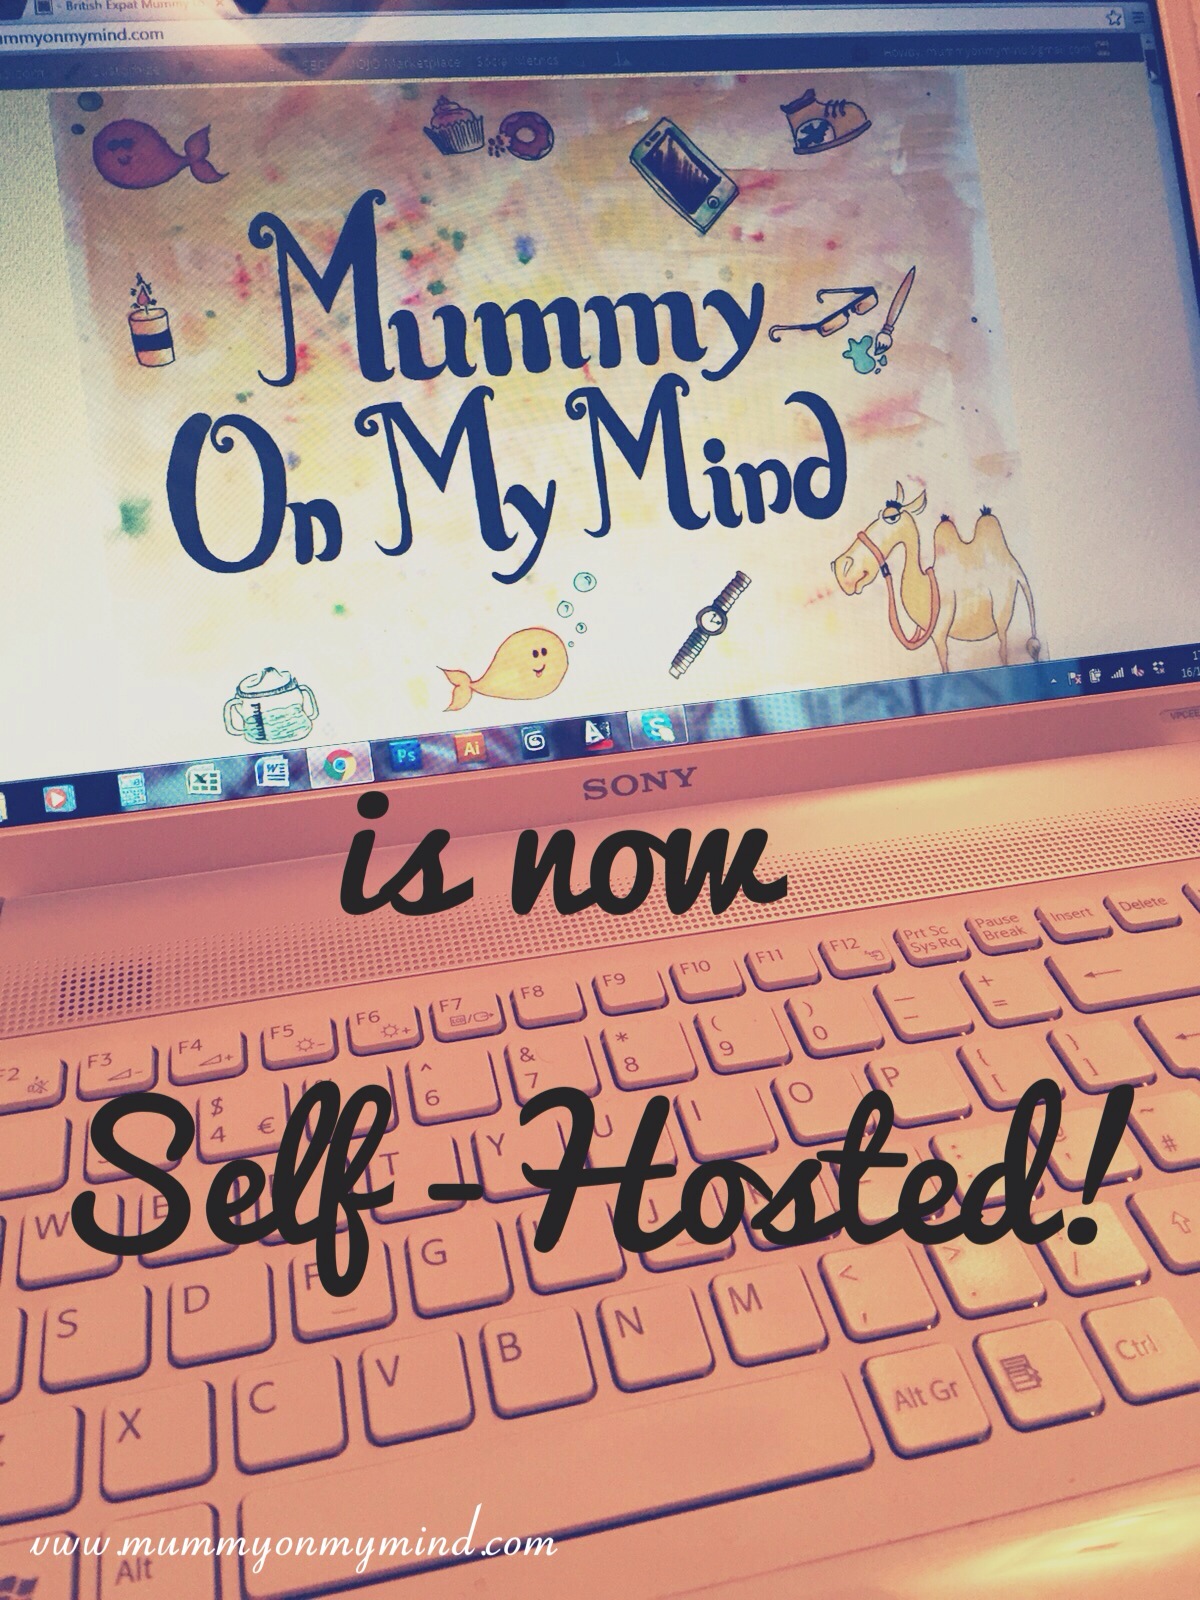 Mummy On My Mind is now self-hosted…